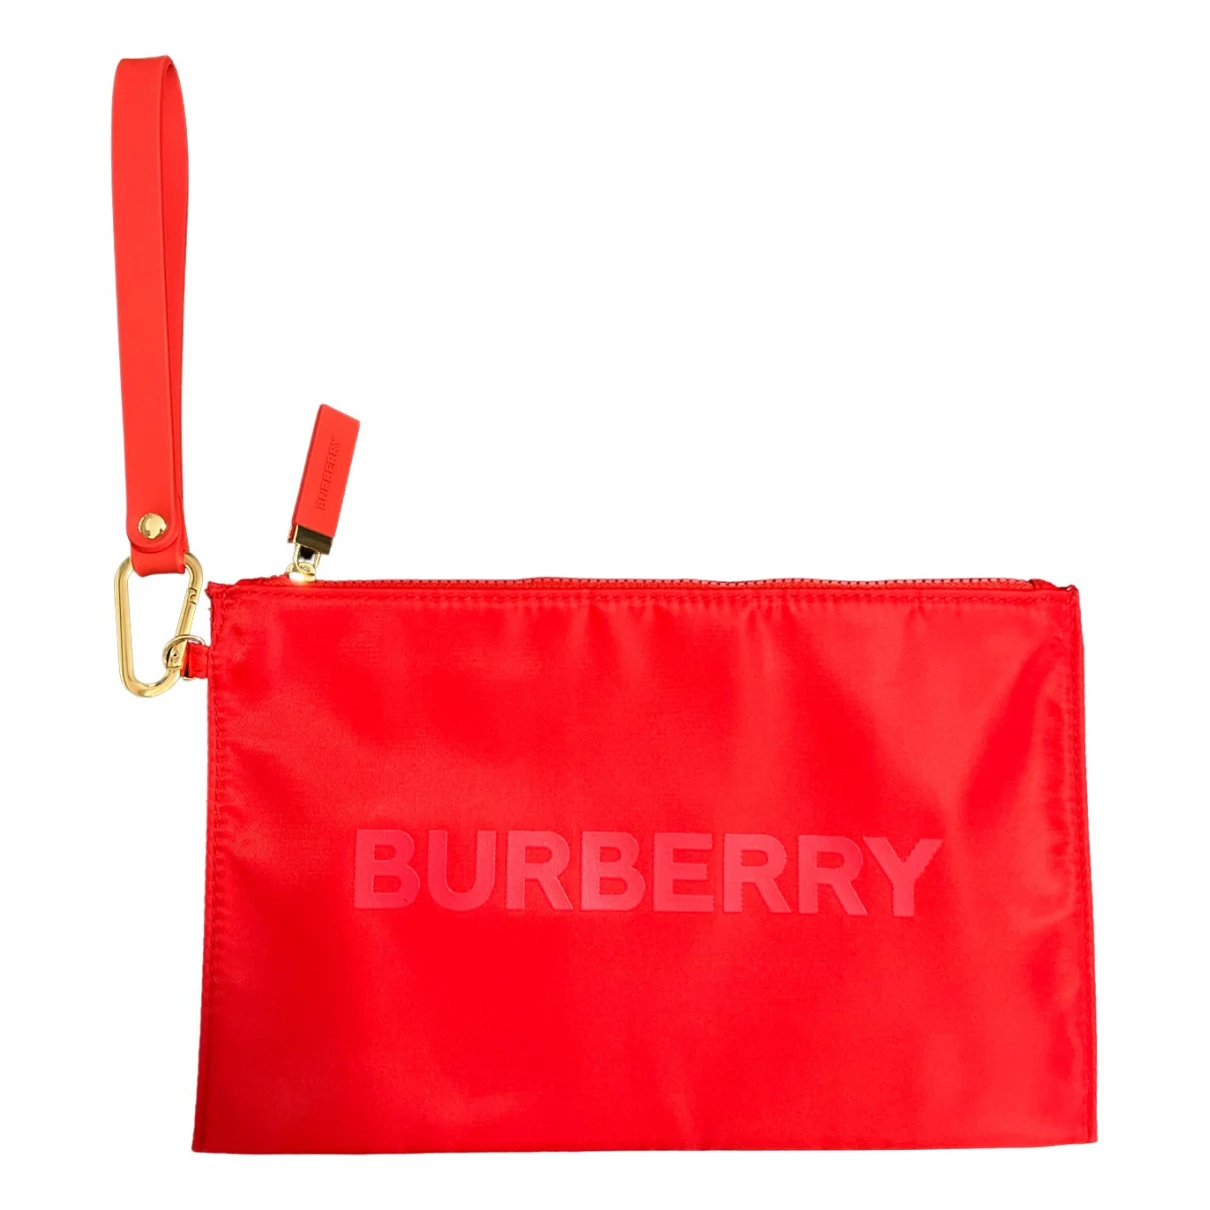 bags Burberry clutch bags for Female Cloth. Used condition